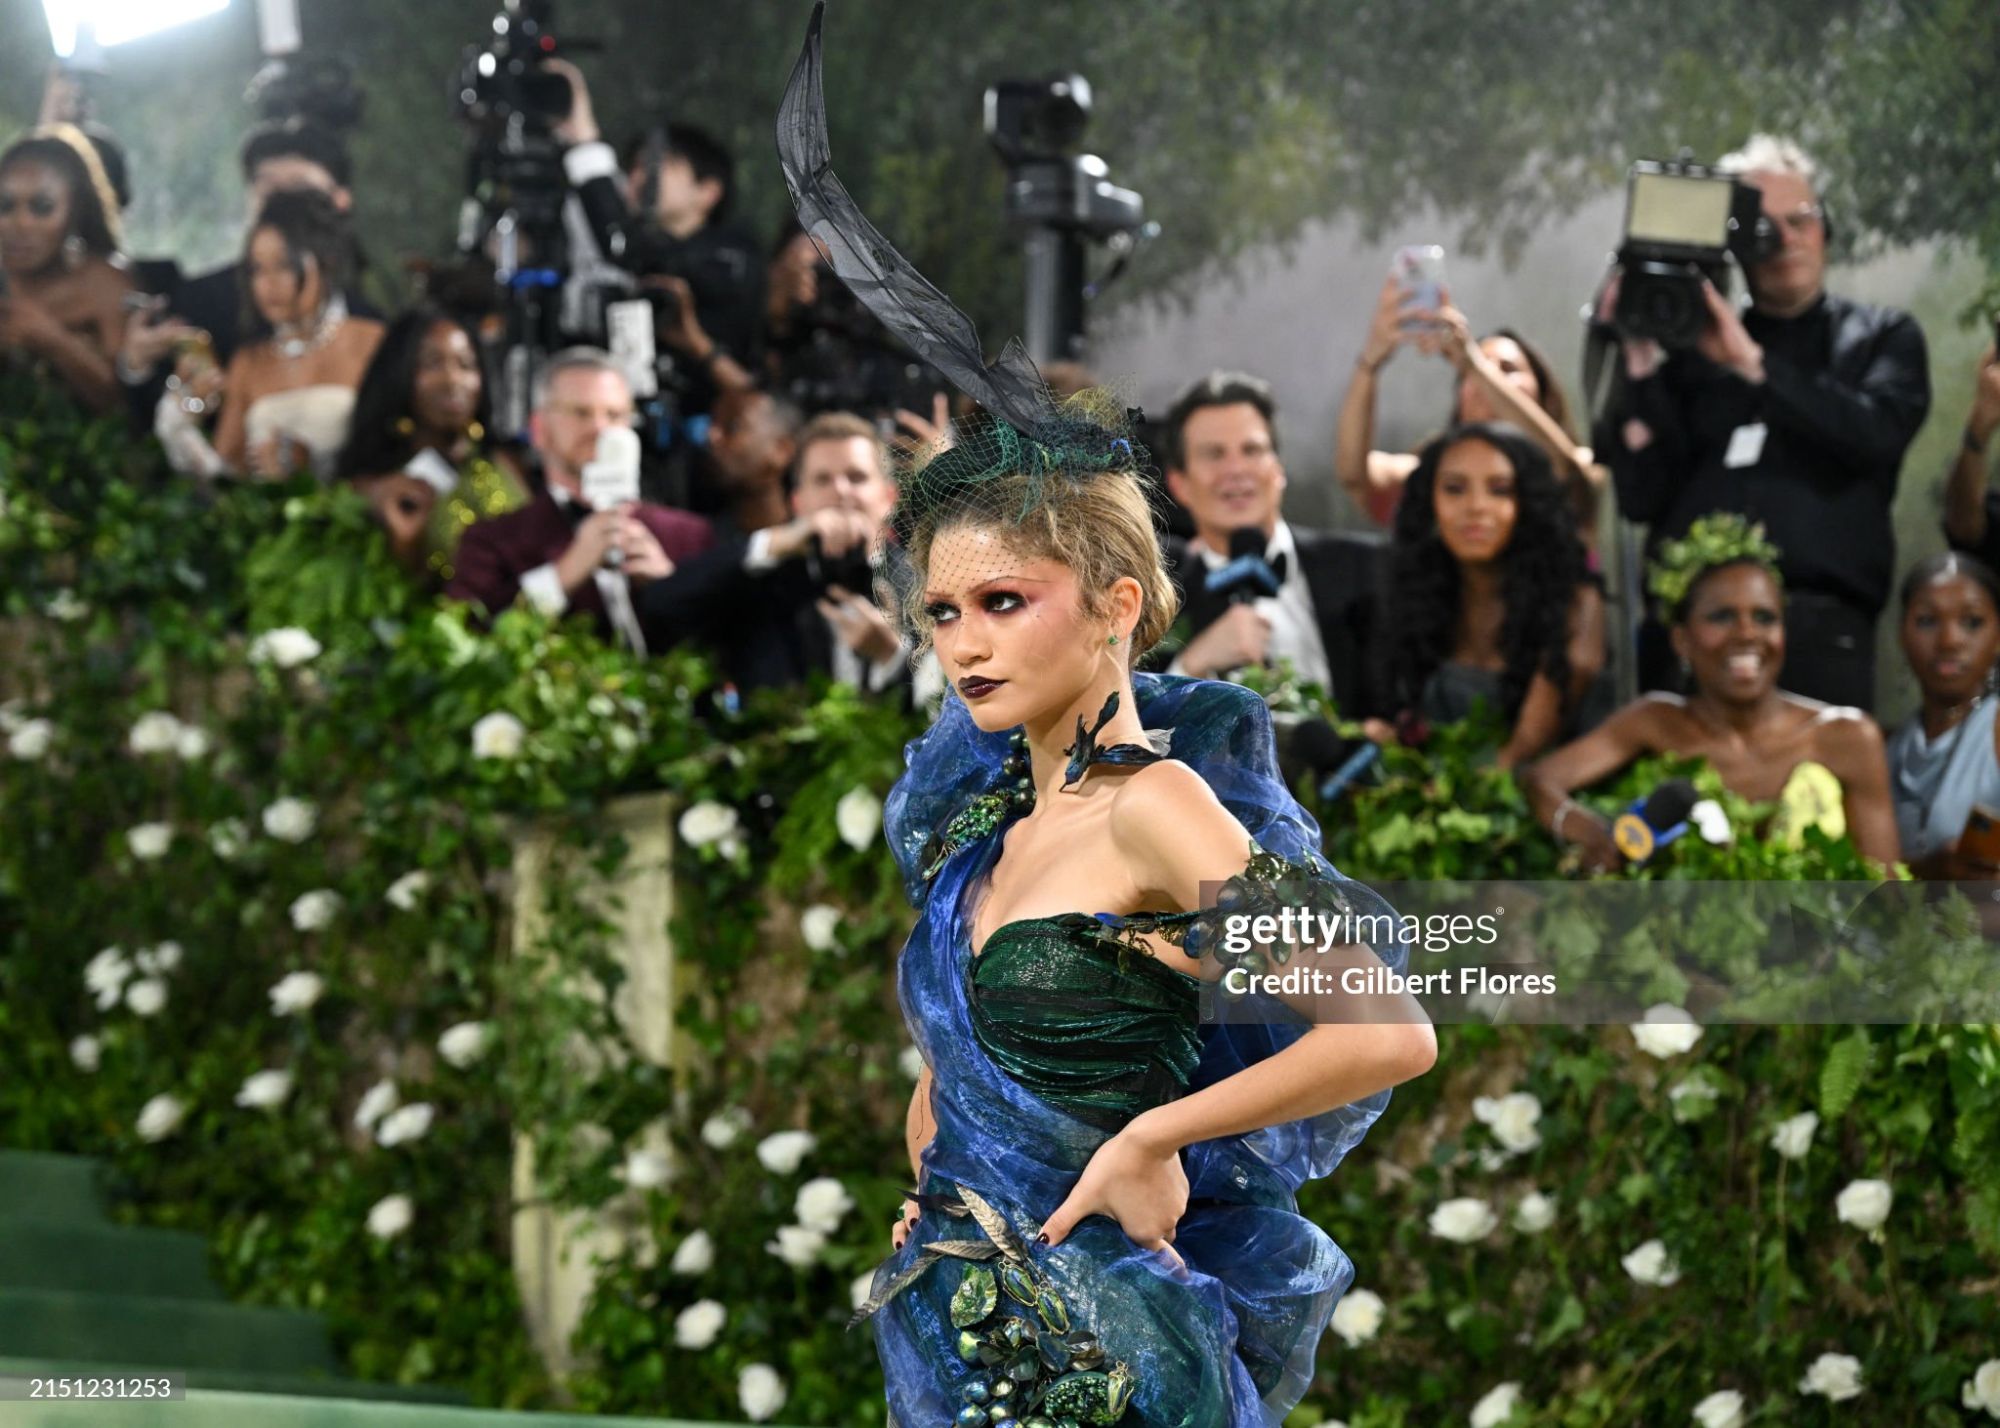 gettyimages-2151231253-2048x2048.jpg